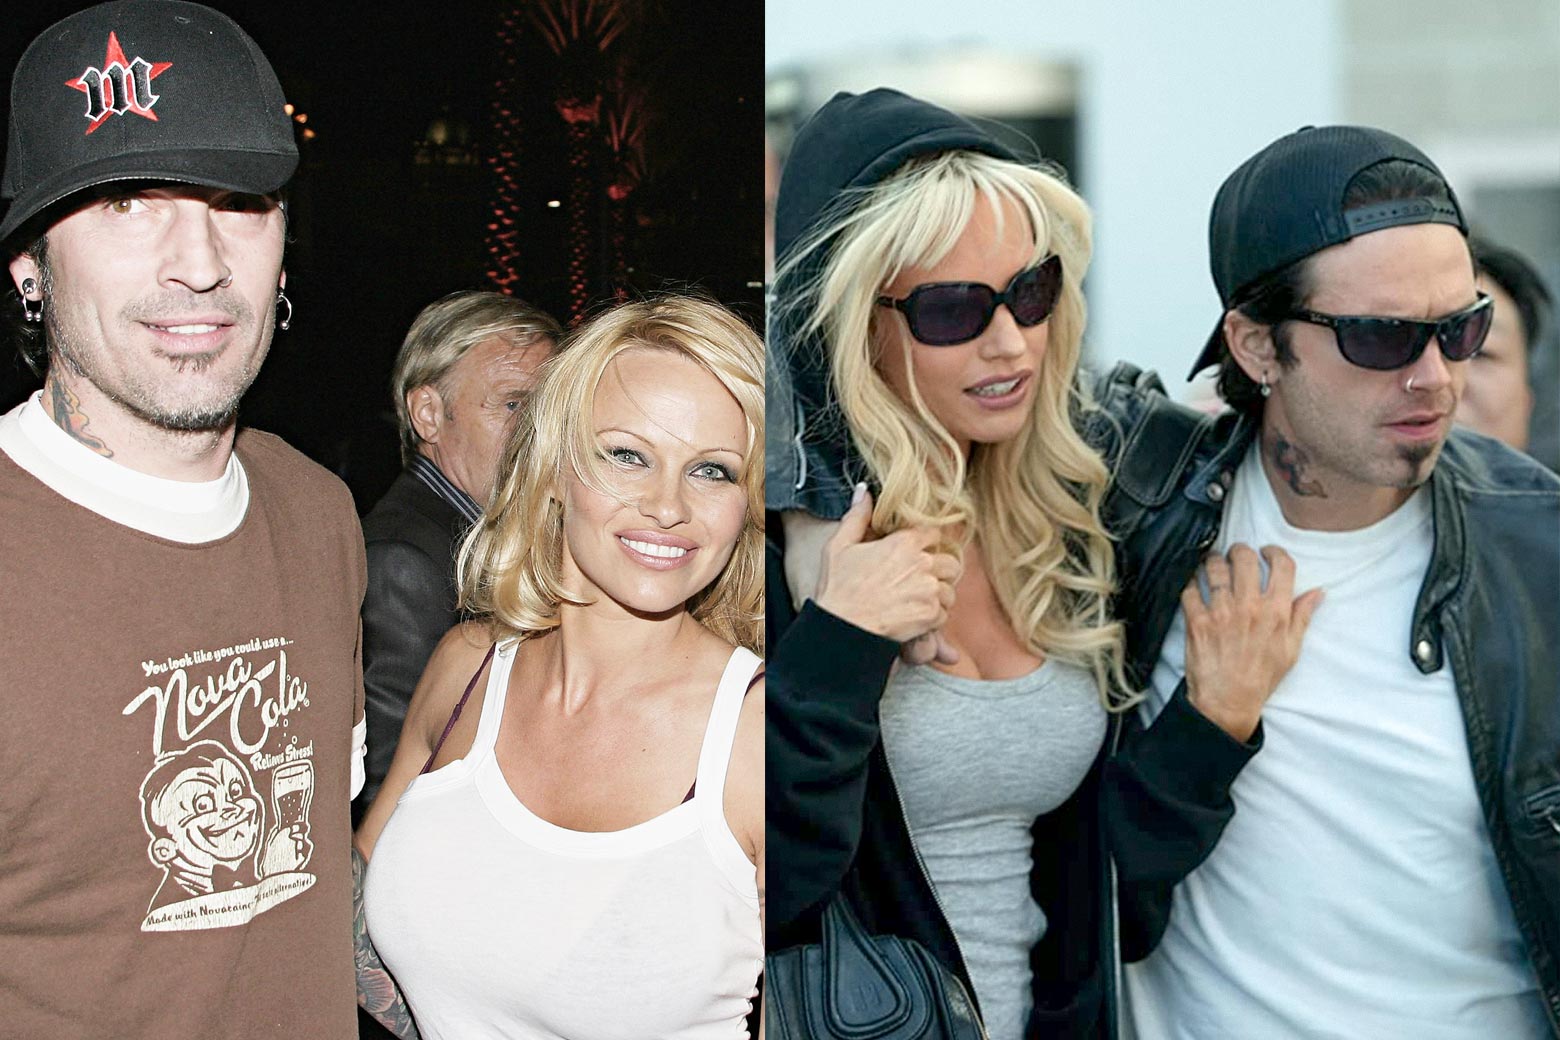 Pam and Tommy accuracy whats fact and whats fiction in the Hulu miniseries about Pamela Anderson and Tommy Lee. photo image